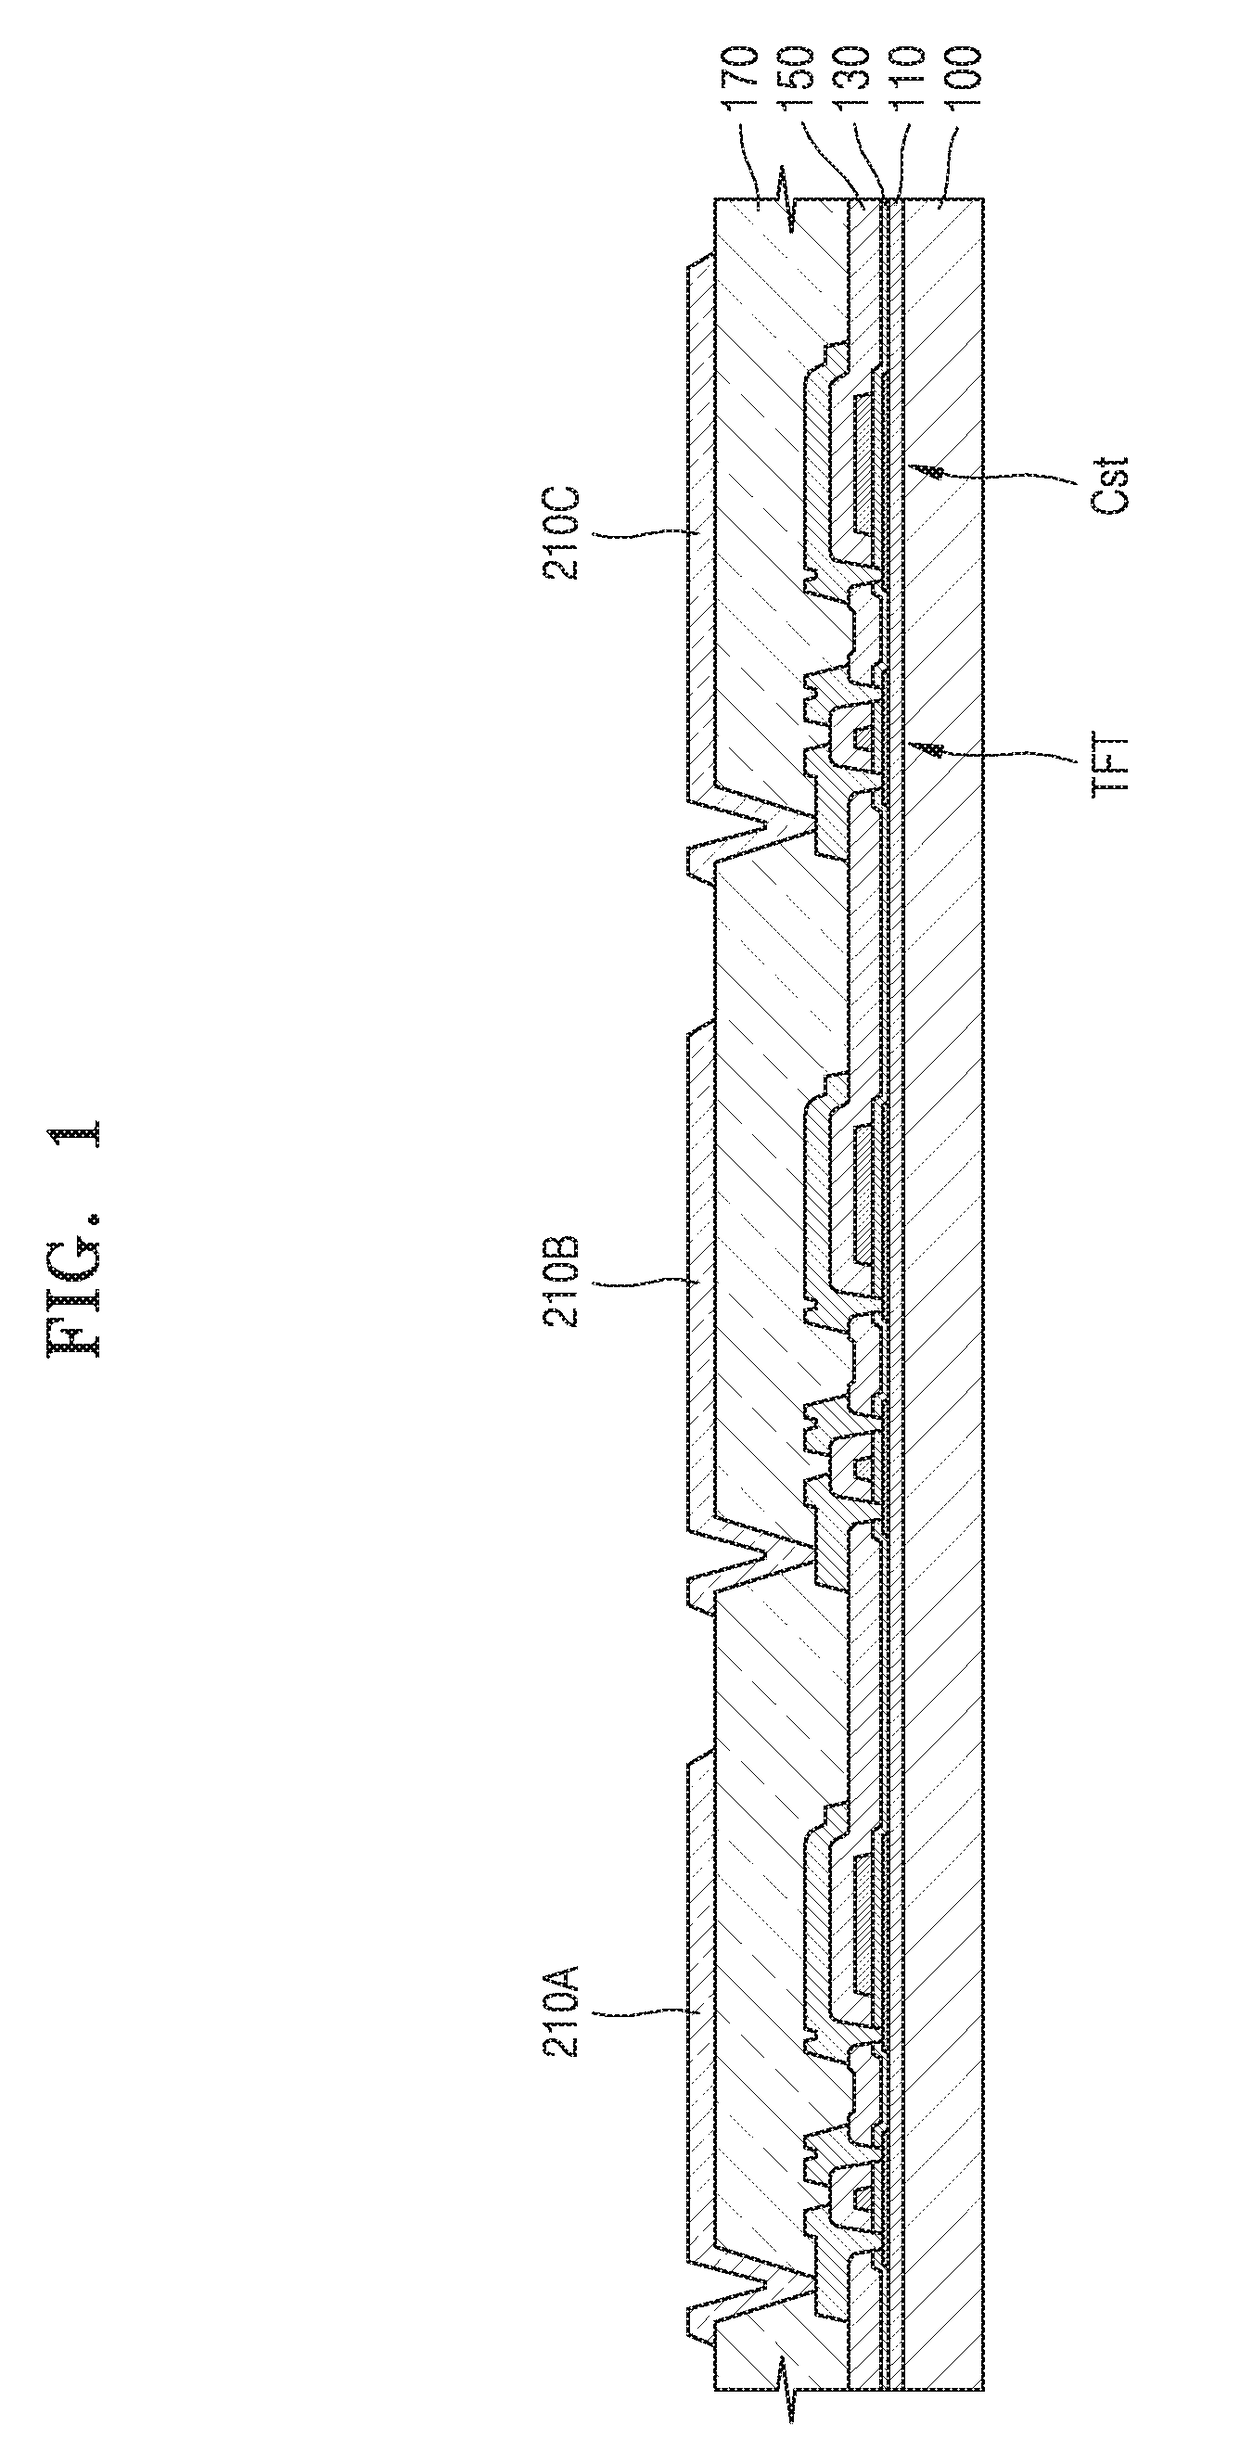 Organic light-emitting display device and method of manufacturing the same